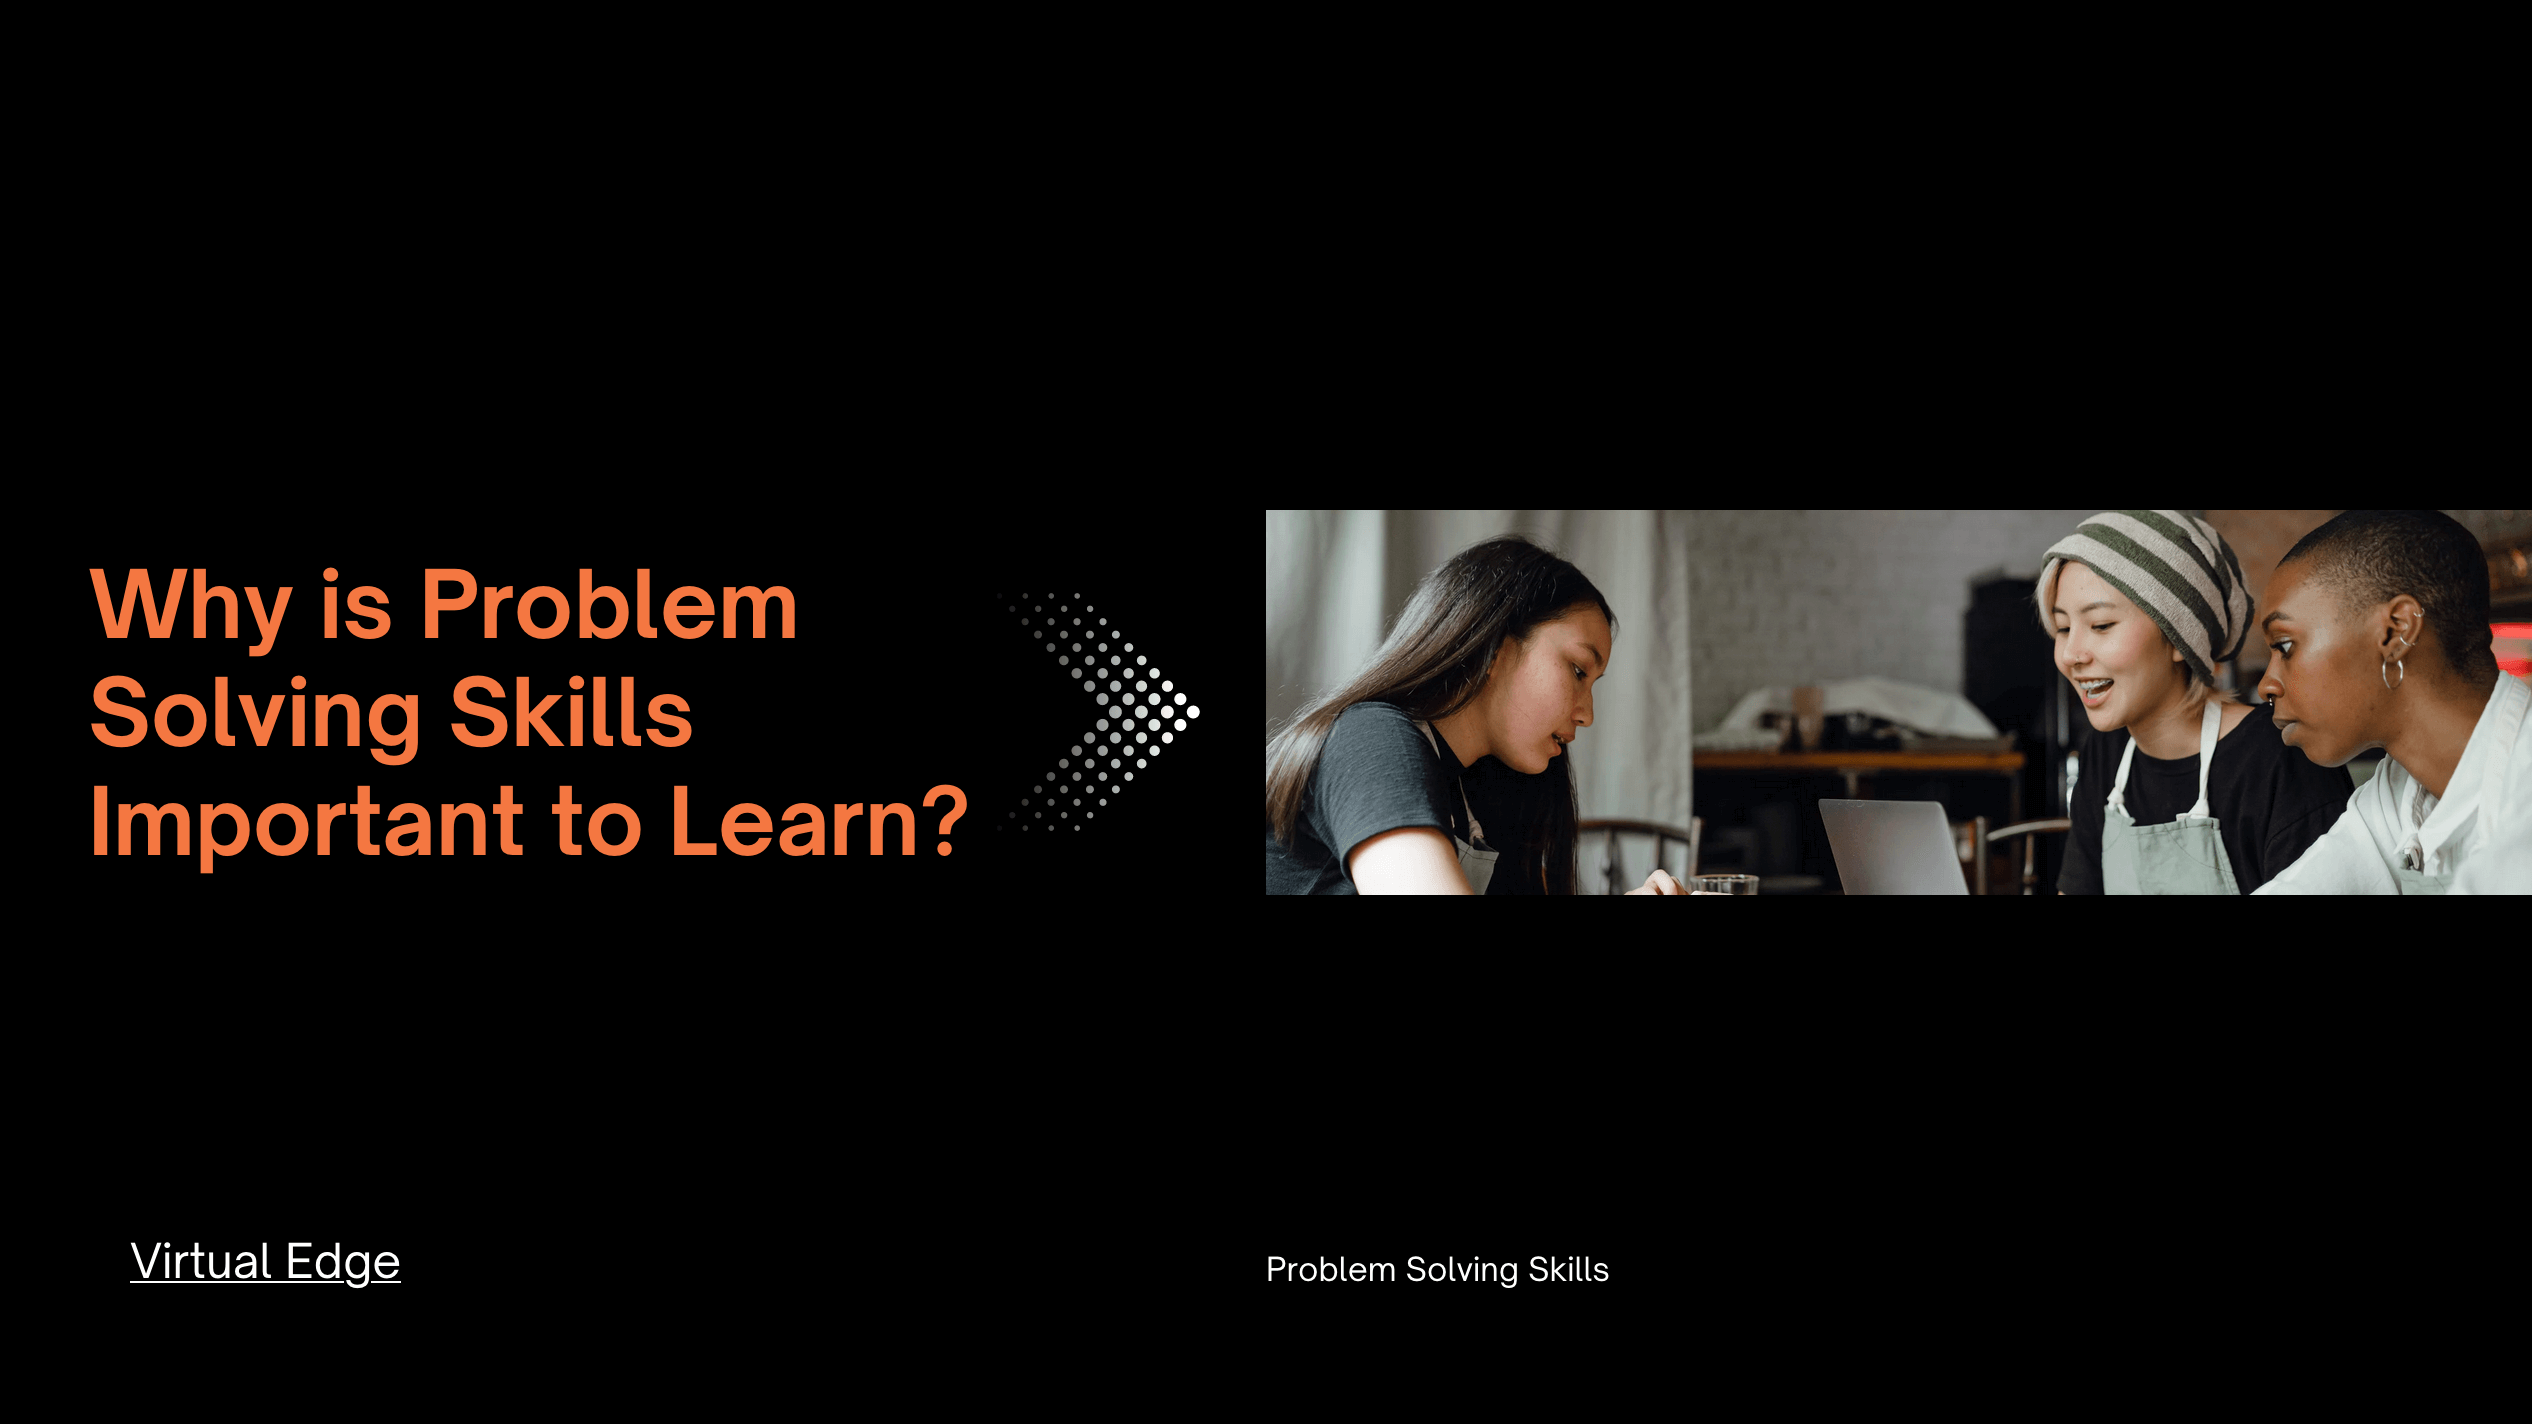 Why is Problem Solving Skills Important to Learn?